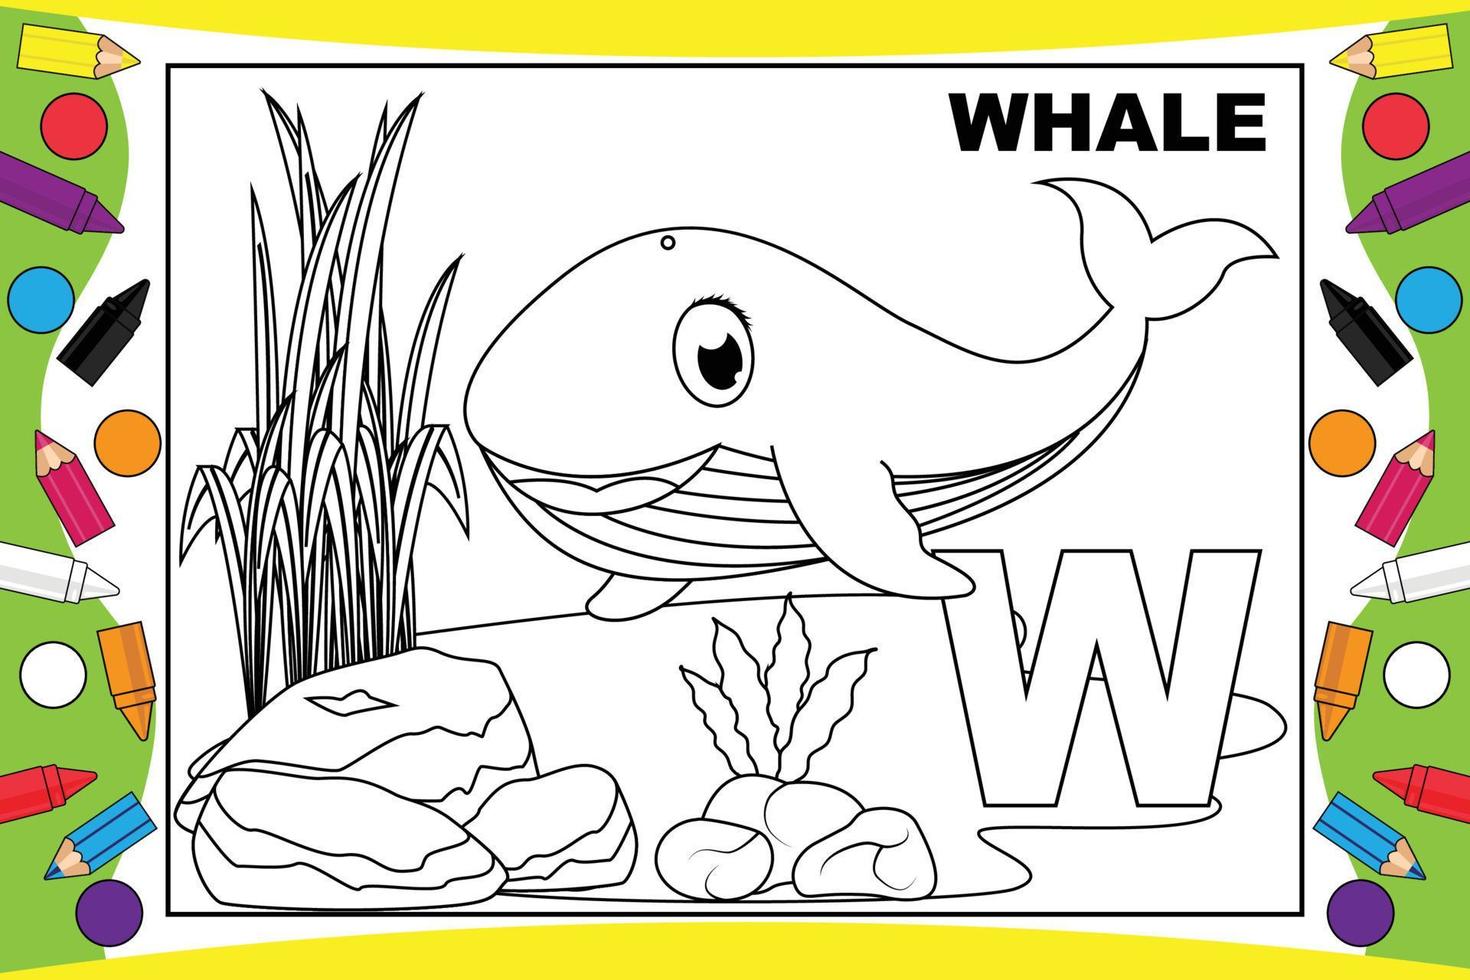 coloring whale cartoon with alphabet for kids vector